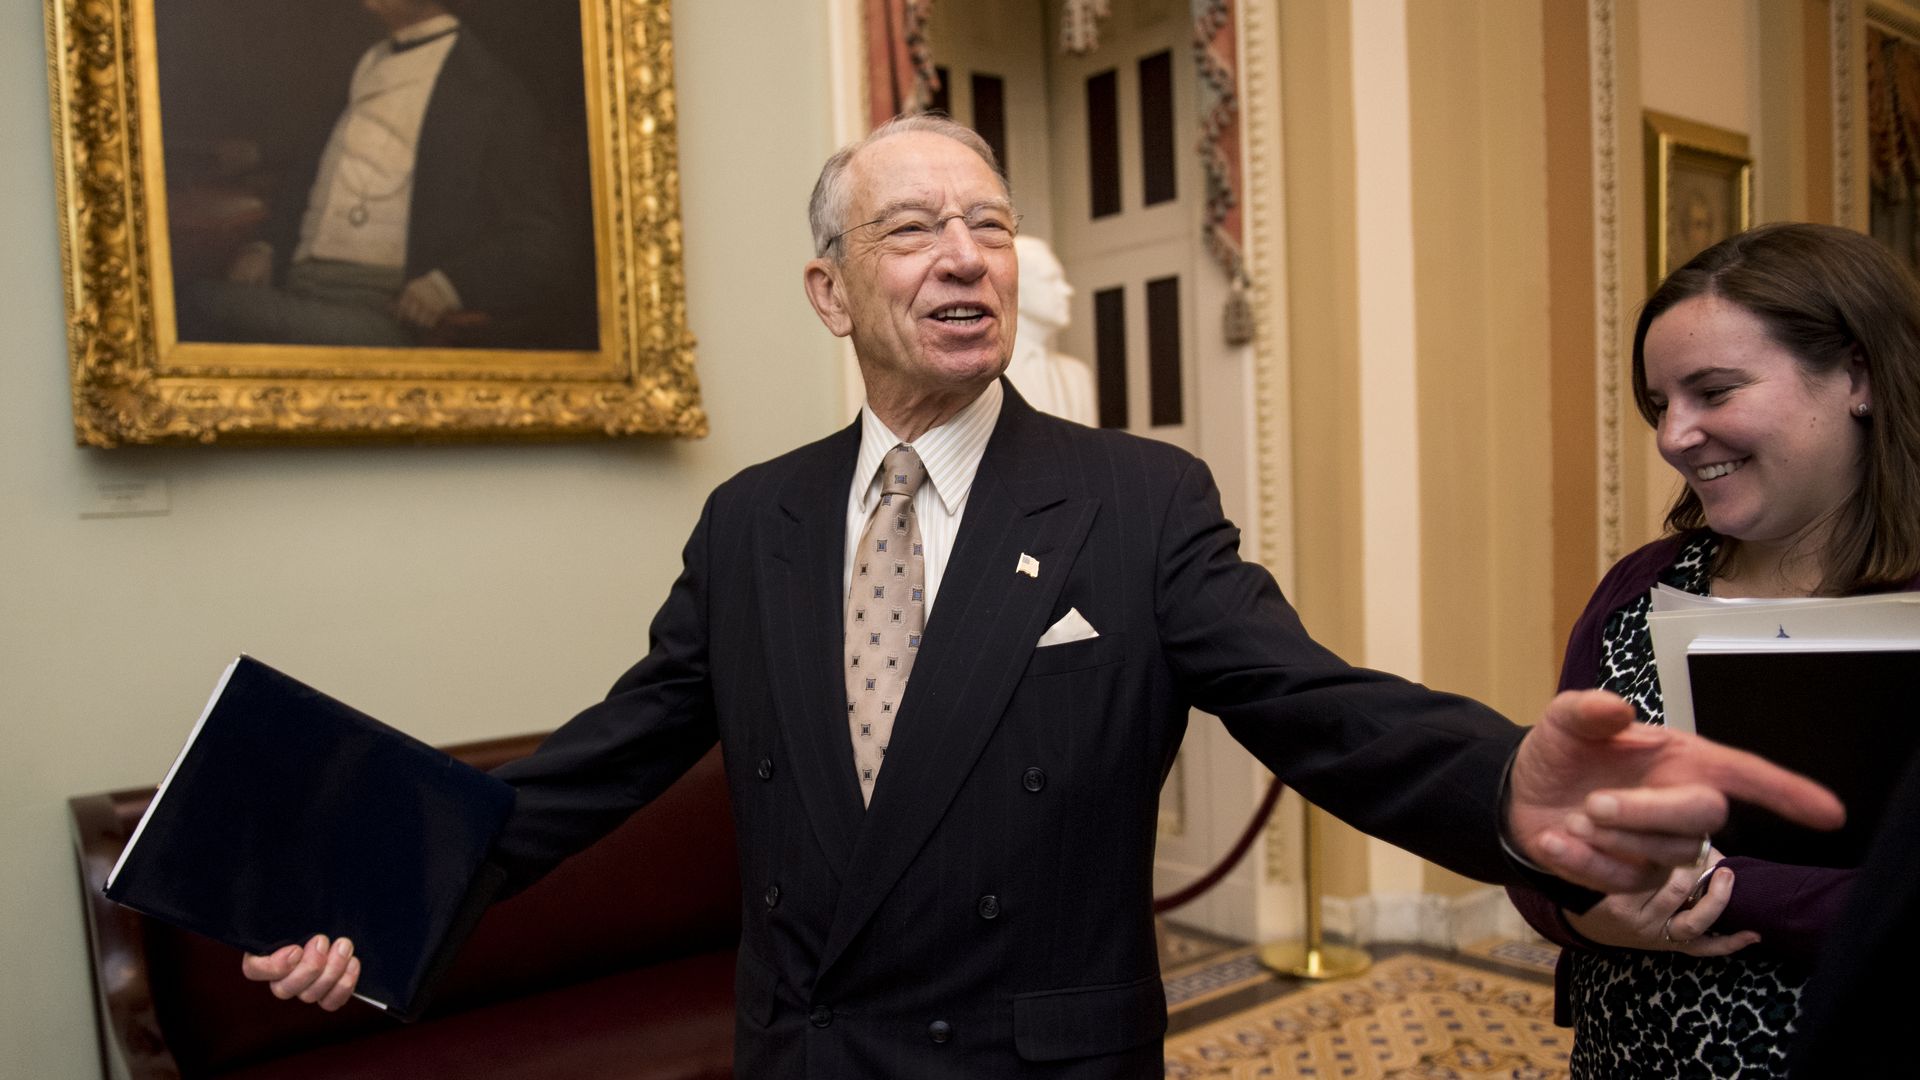 Senator Chuck Grassley, wearing a suit and tie, in the middle of an interaction with someone off-screen